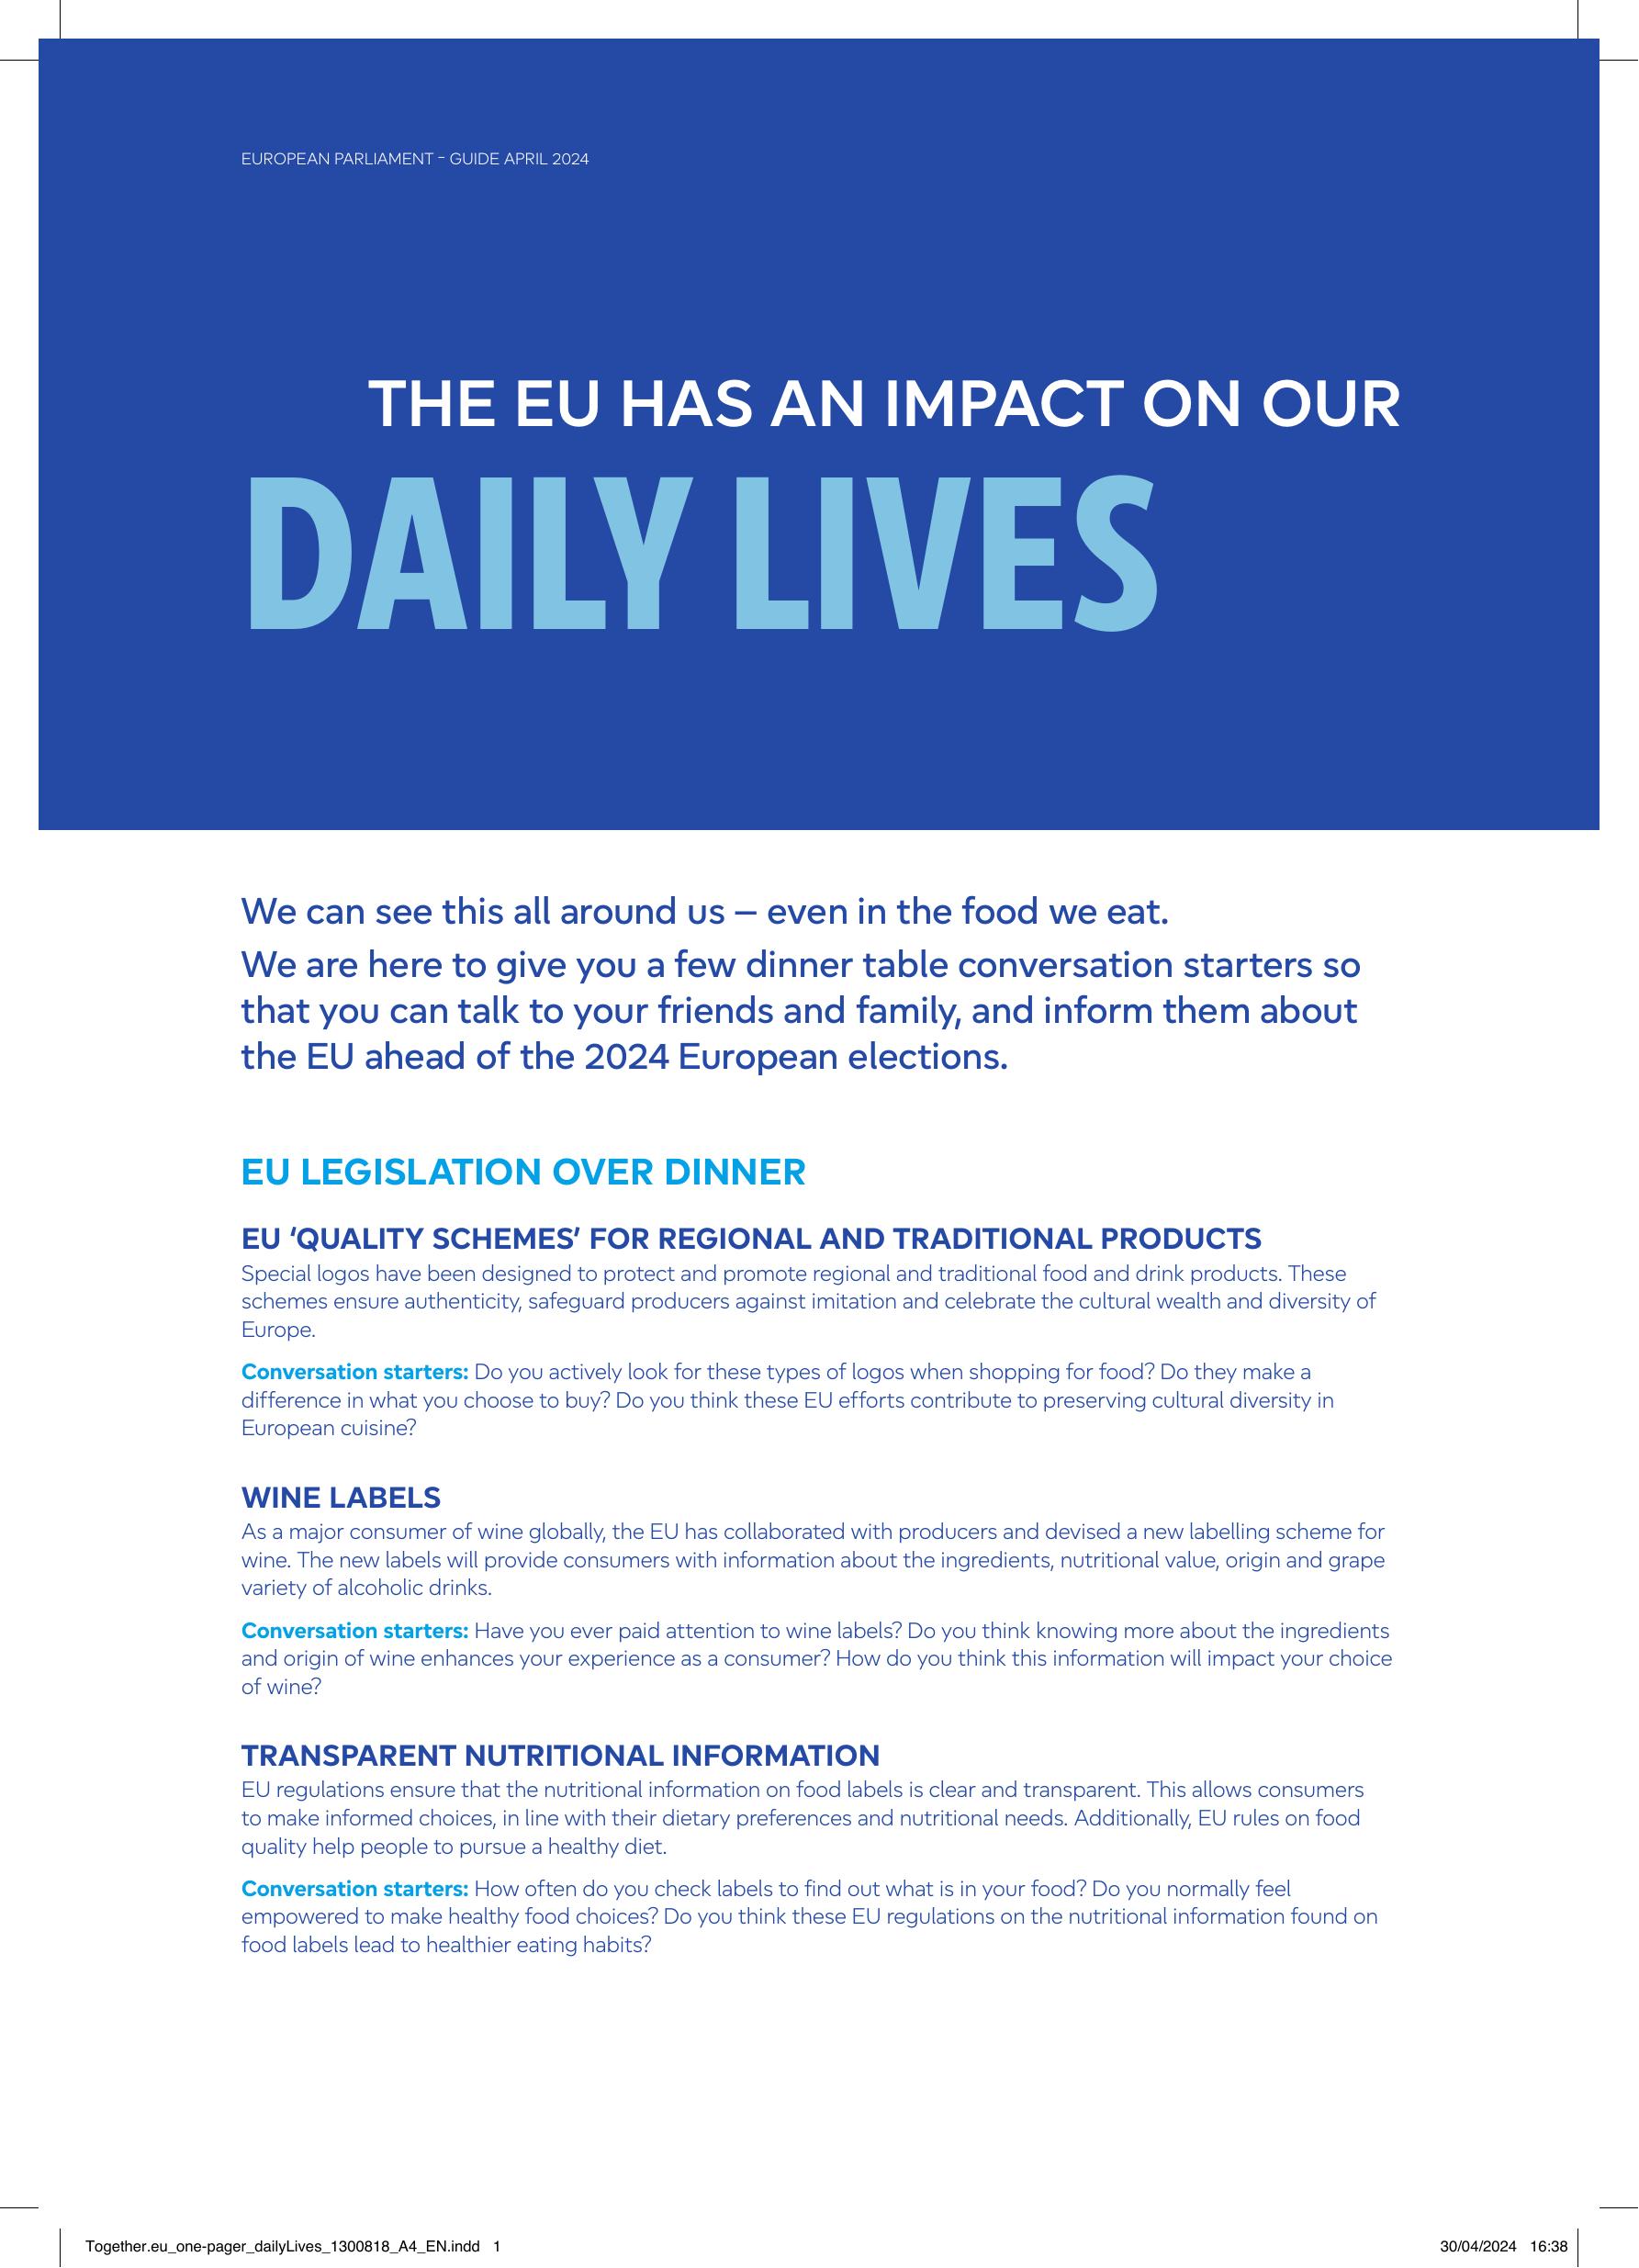 Together.eu_one-pager_dailyLives_print.pdf